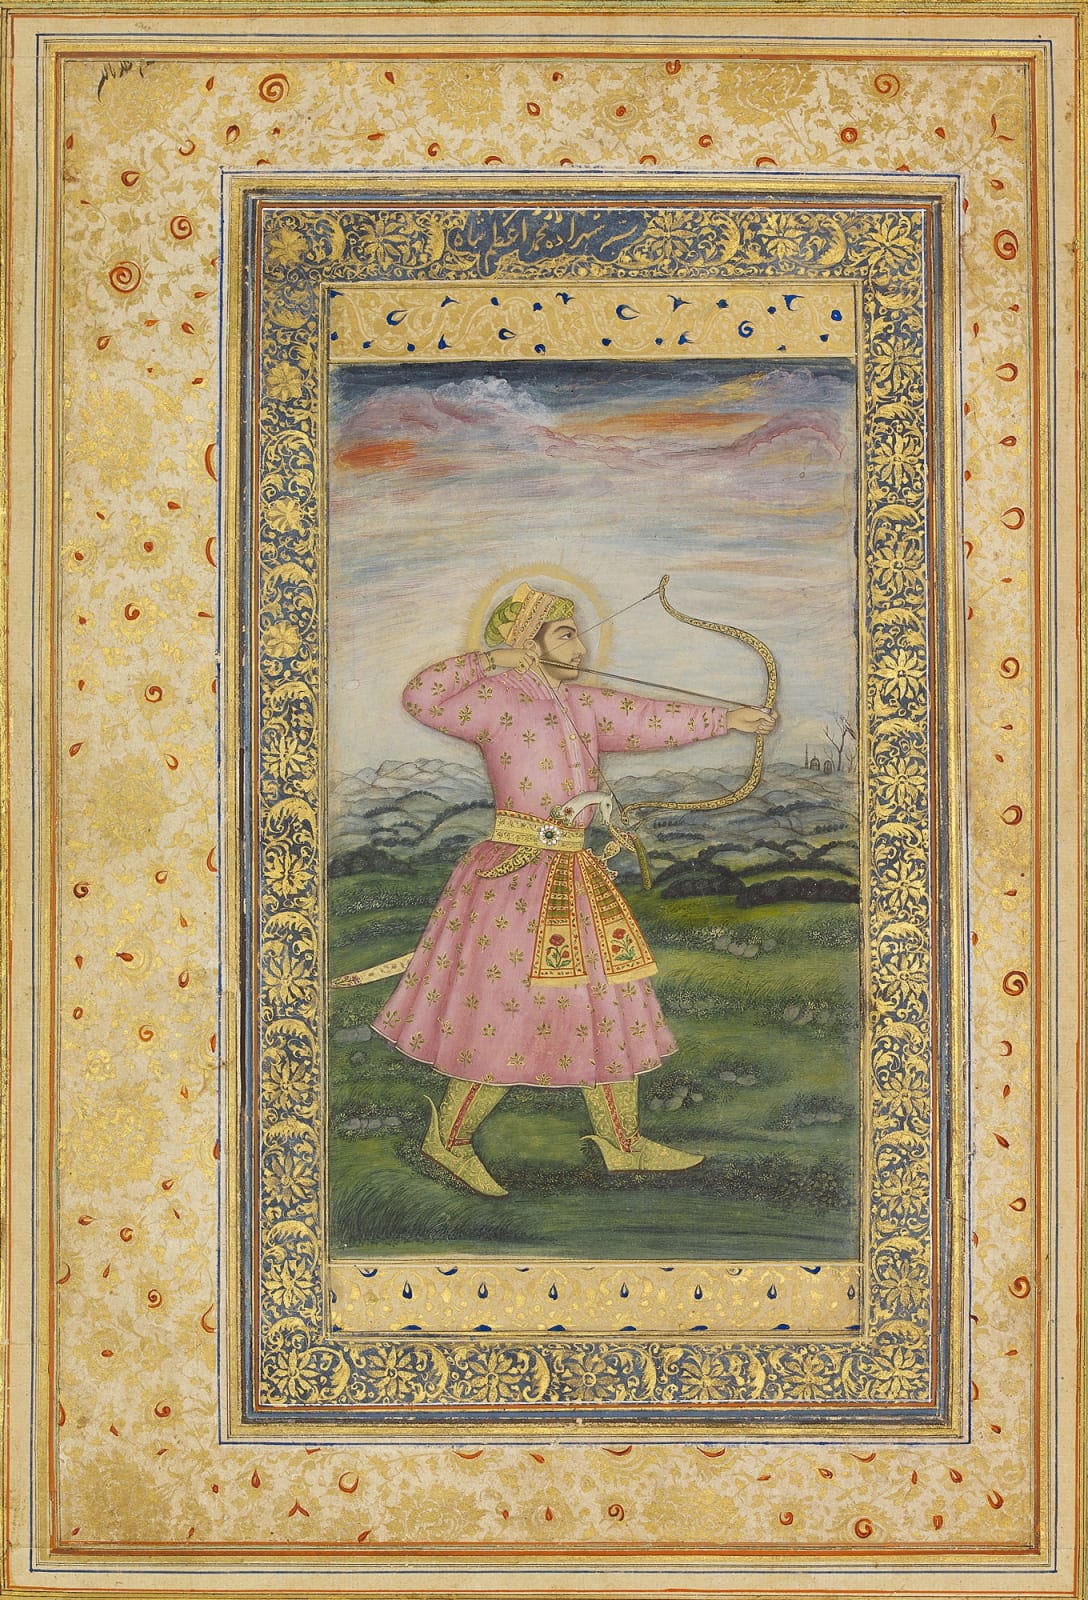 Portrait of Prince ‘Azam Shah with Bow and Arrow, Mughal, Delhi, early 19th century